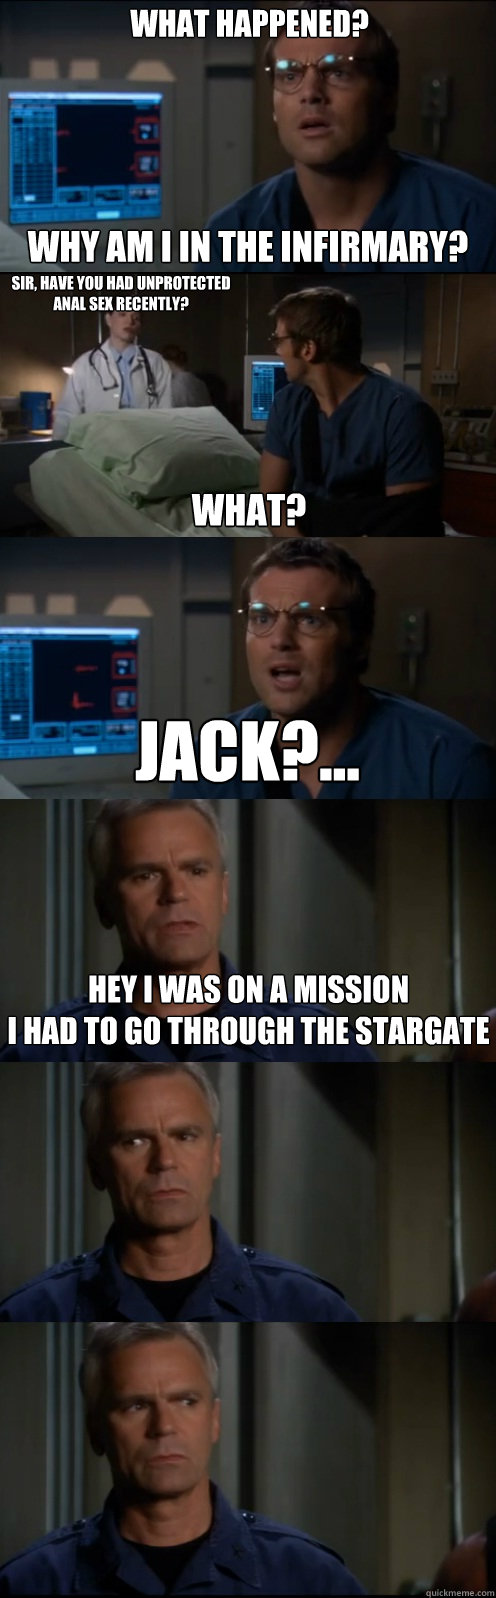 What Happened?  Why am I in the infirmary? Sir, have you had unprotected anal sex recently? What? Jack?... Hey I was on a mission
I had to go through the stargate  